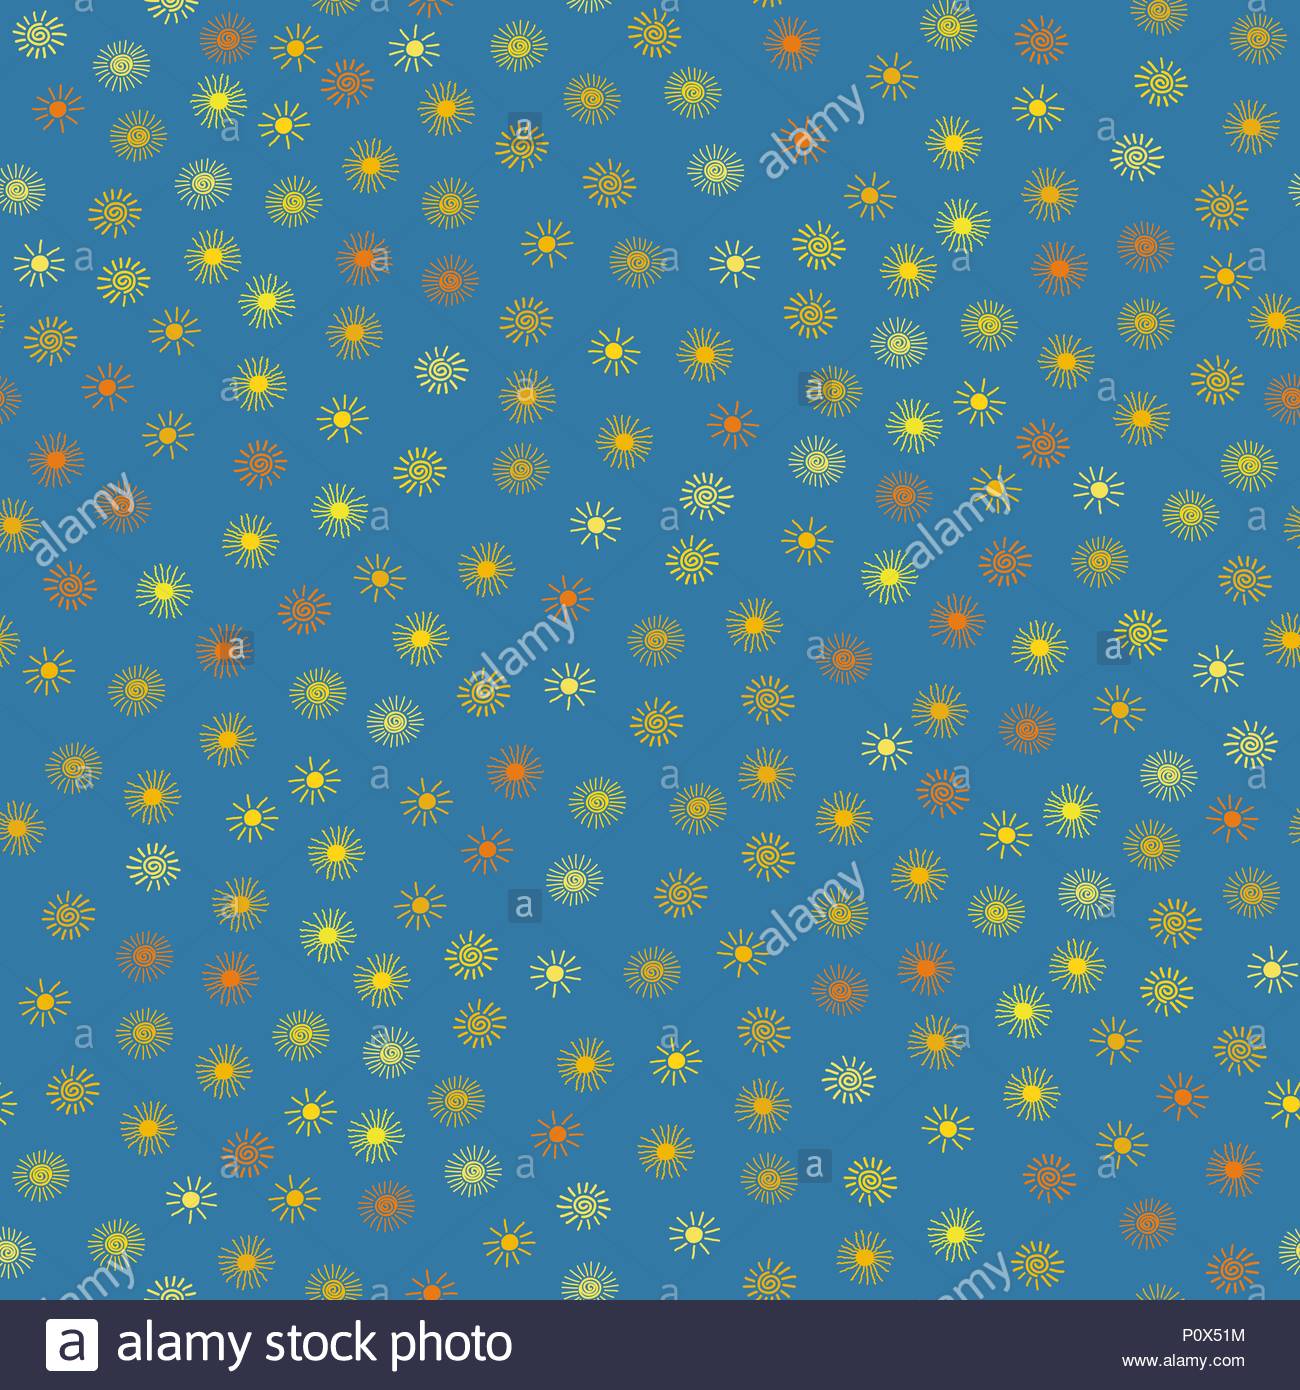 Seamless Pattern From Small Suns On A Blue Background Shadeless